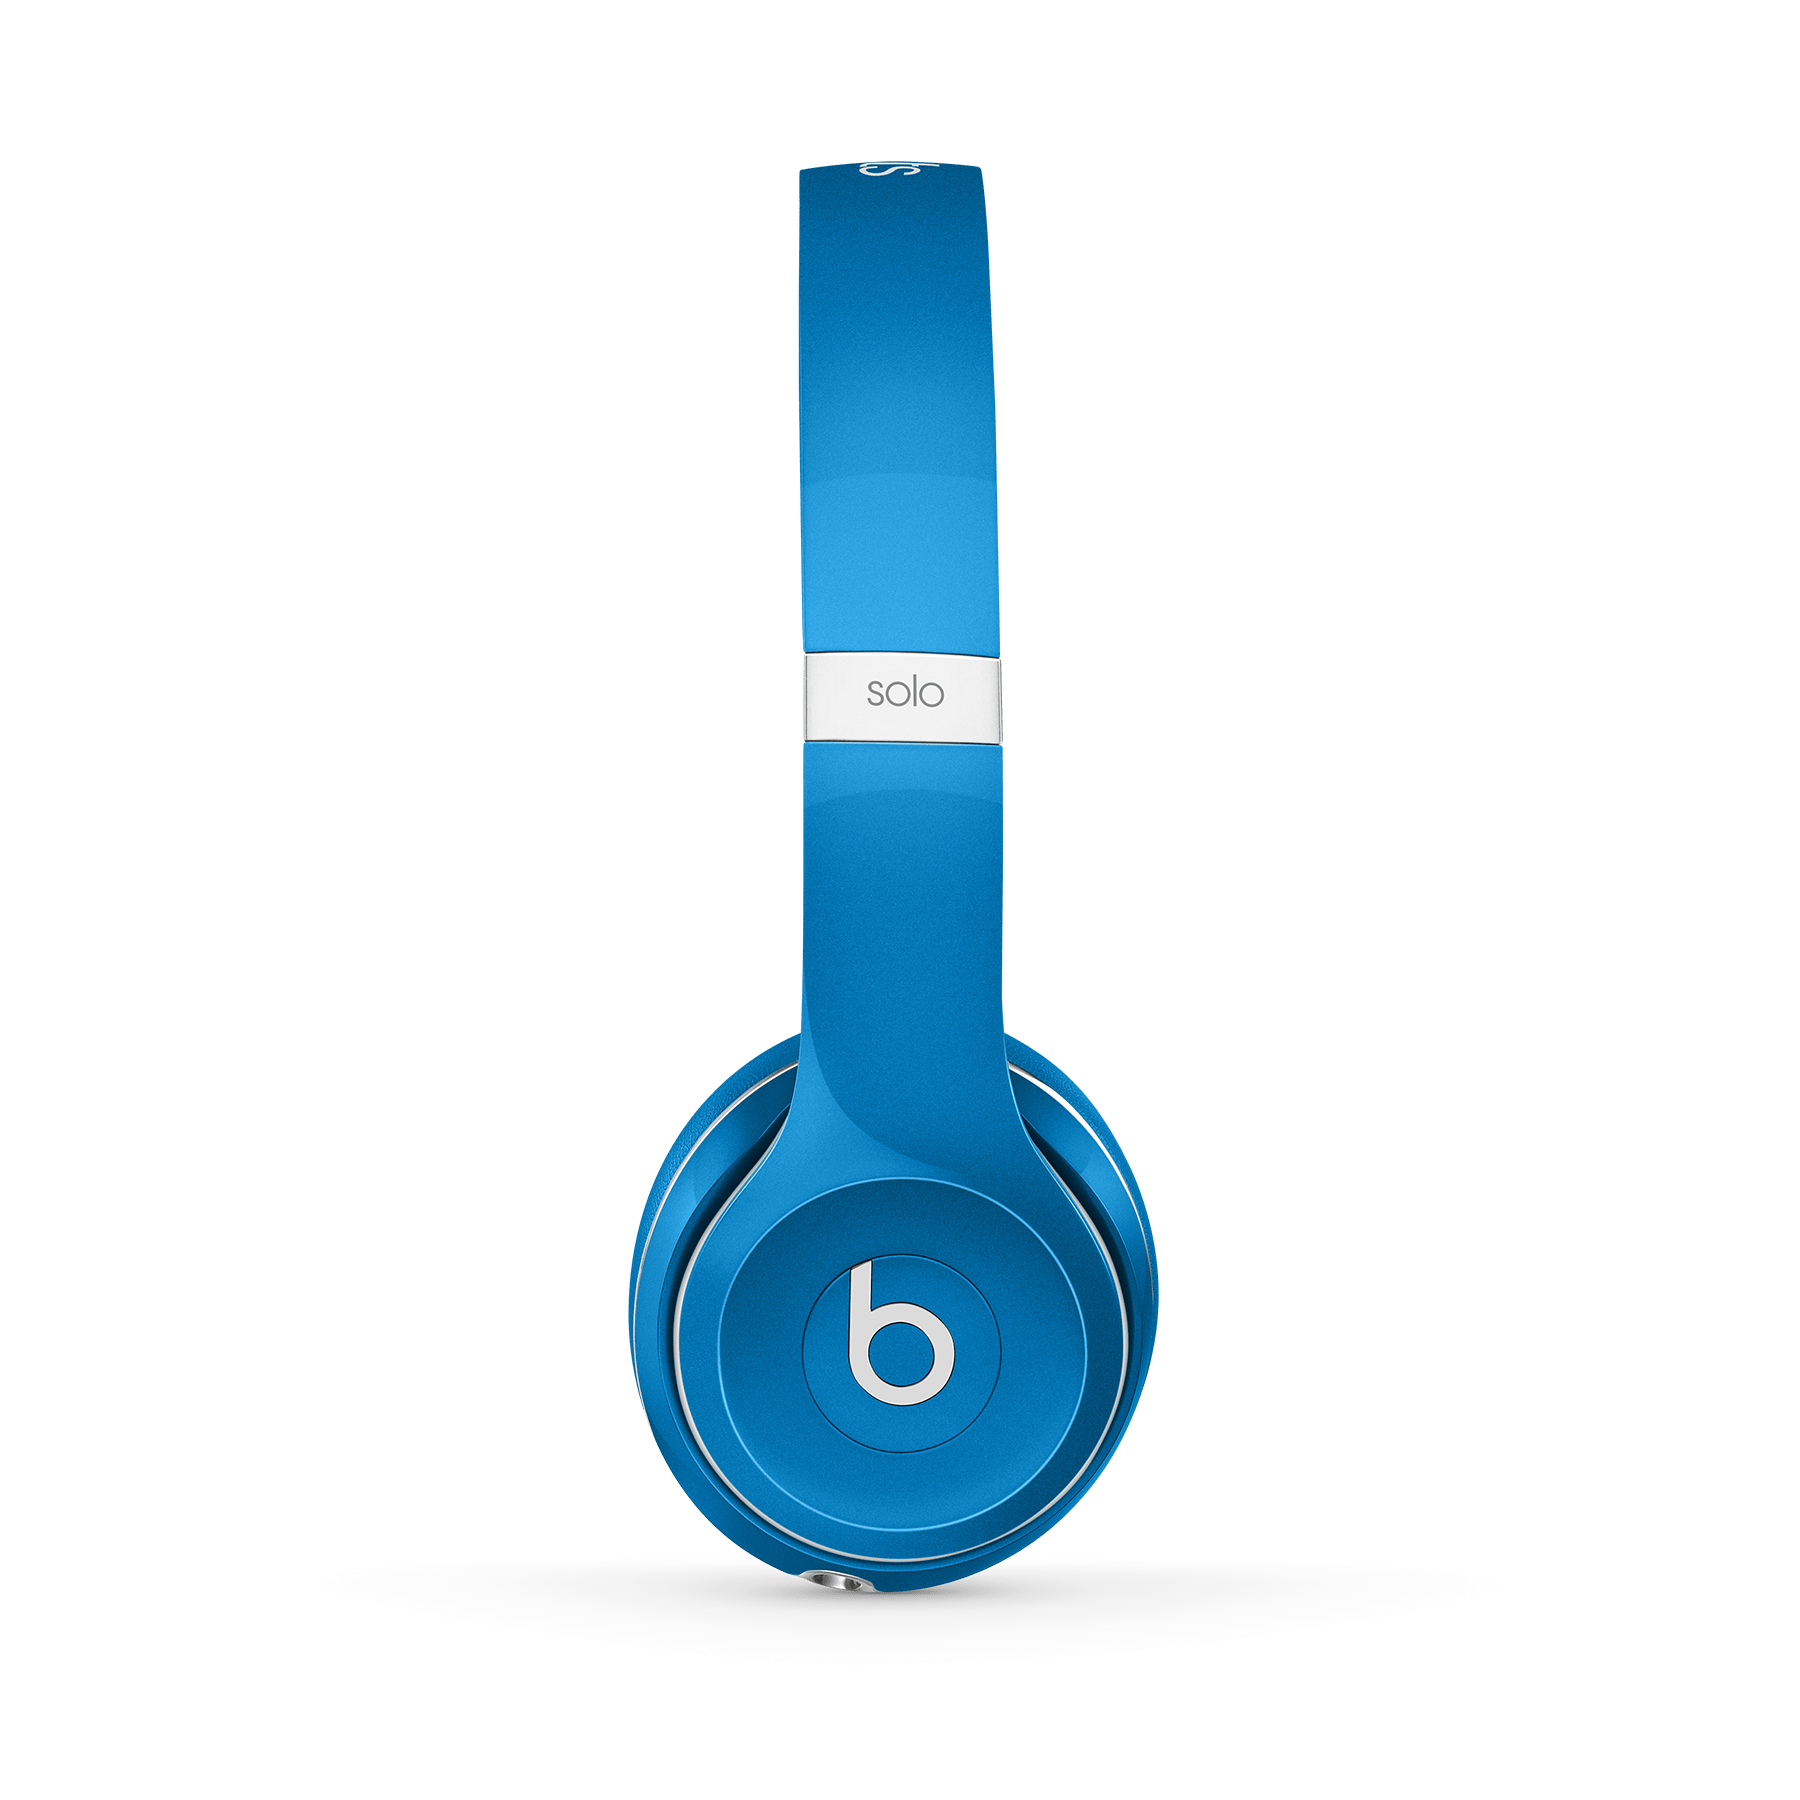 beats solo 2 luxe blue